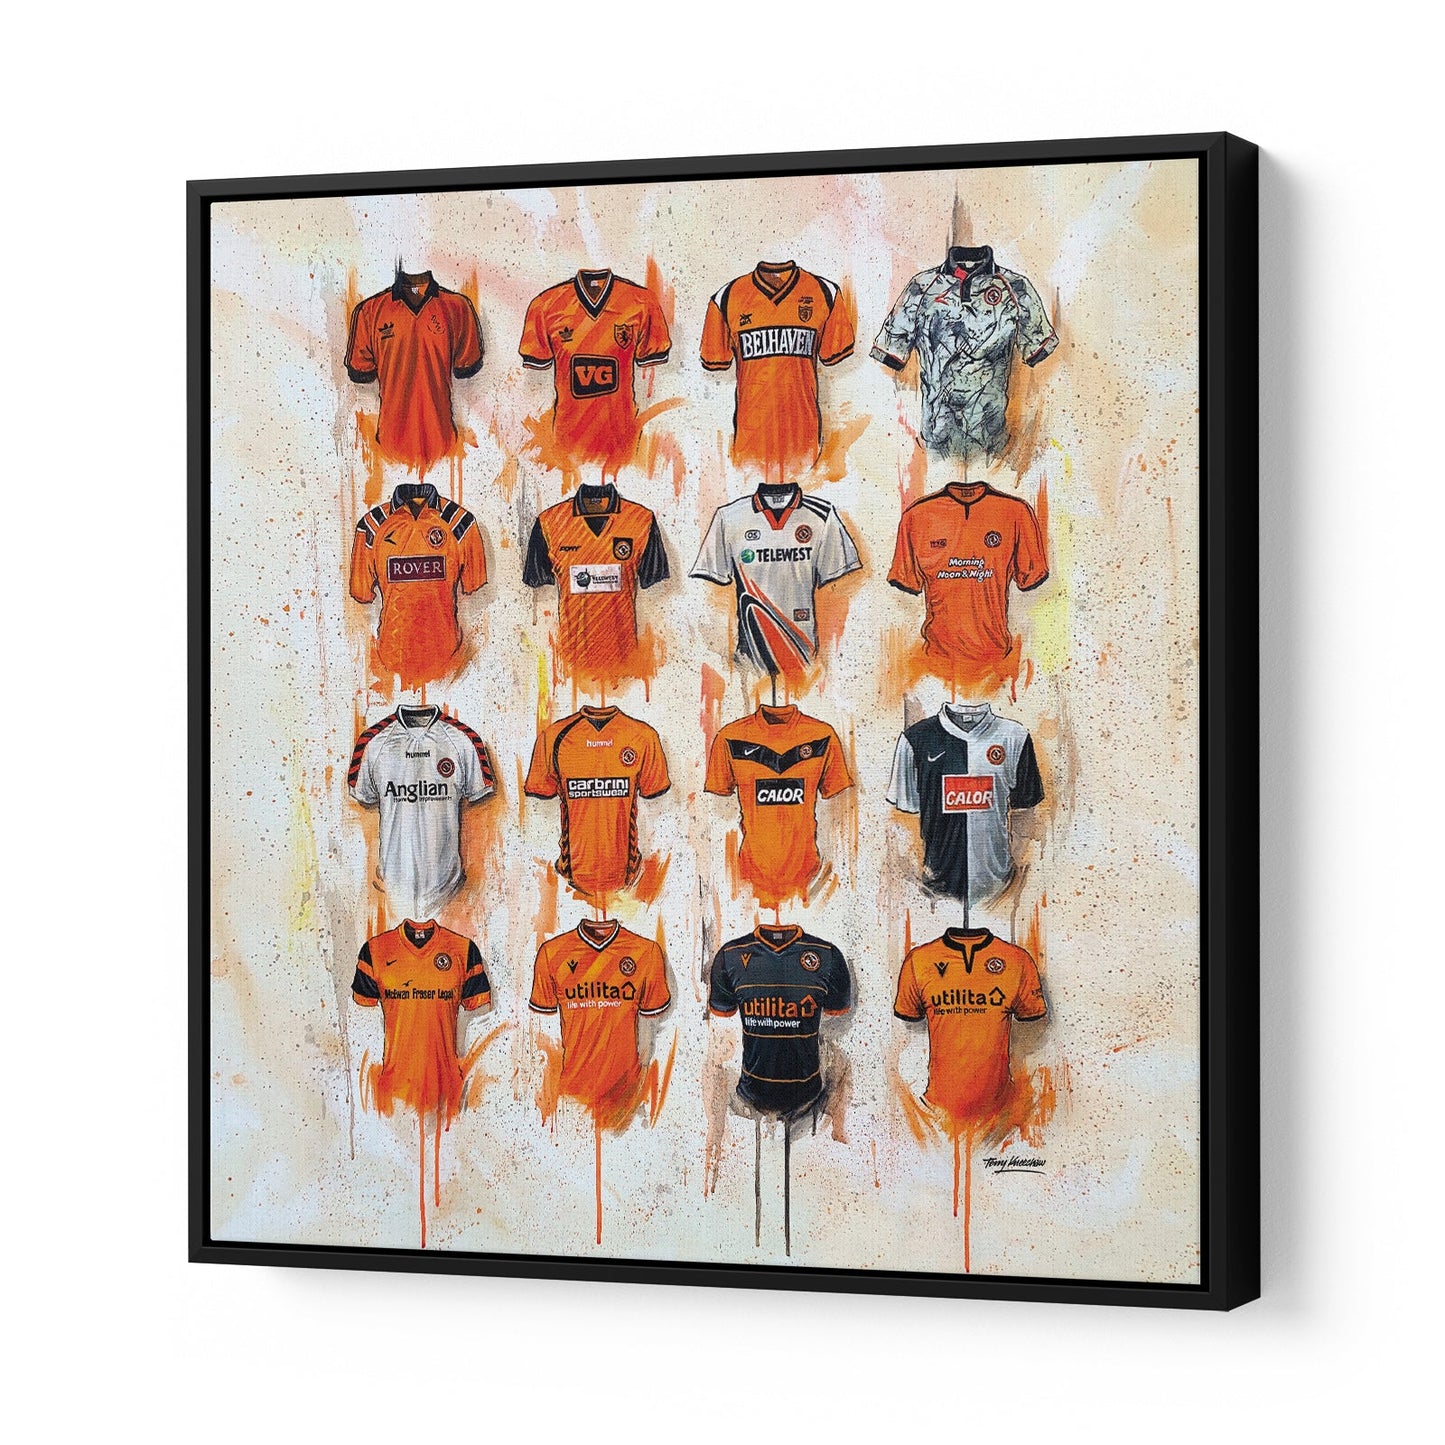 These stunning Dundee United Canvases from Terry Kneeshaw are the perfect way to show support for the club. The artwork is available in various sizes (20x20, 30x30 or 40x40) and can be framed or unframed with a sleek black floating frame. Choose from a range of designs that capture the spirit of the team and celebrate the club's rich history. Ideal for hanging in your home, office, or game room, these canvases are a must-have for any Dundee United fan.